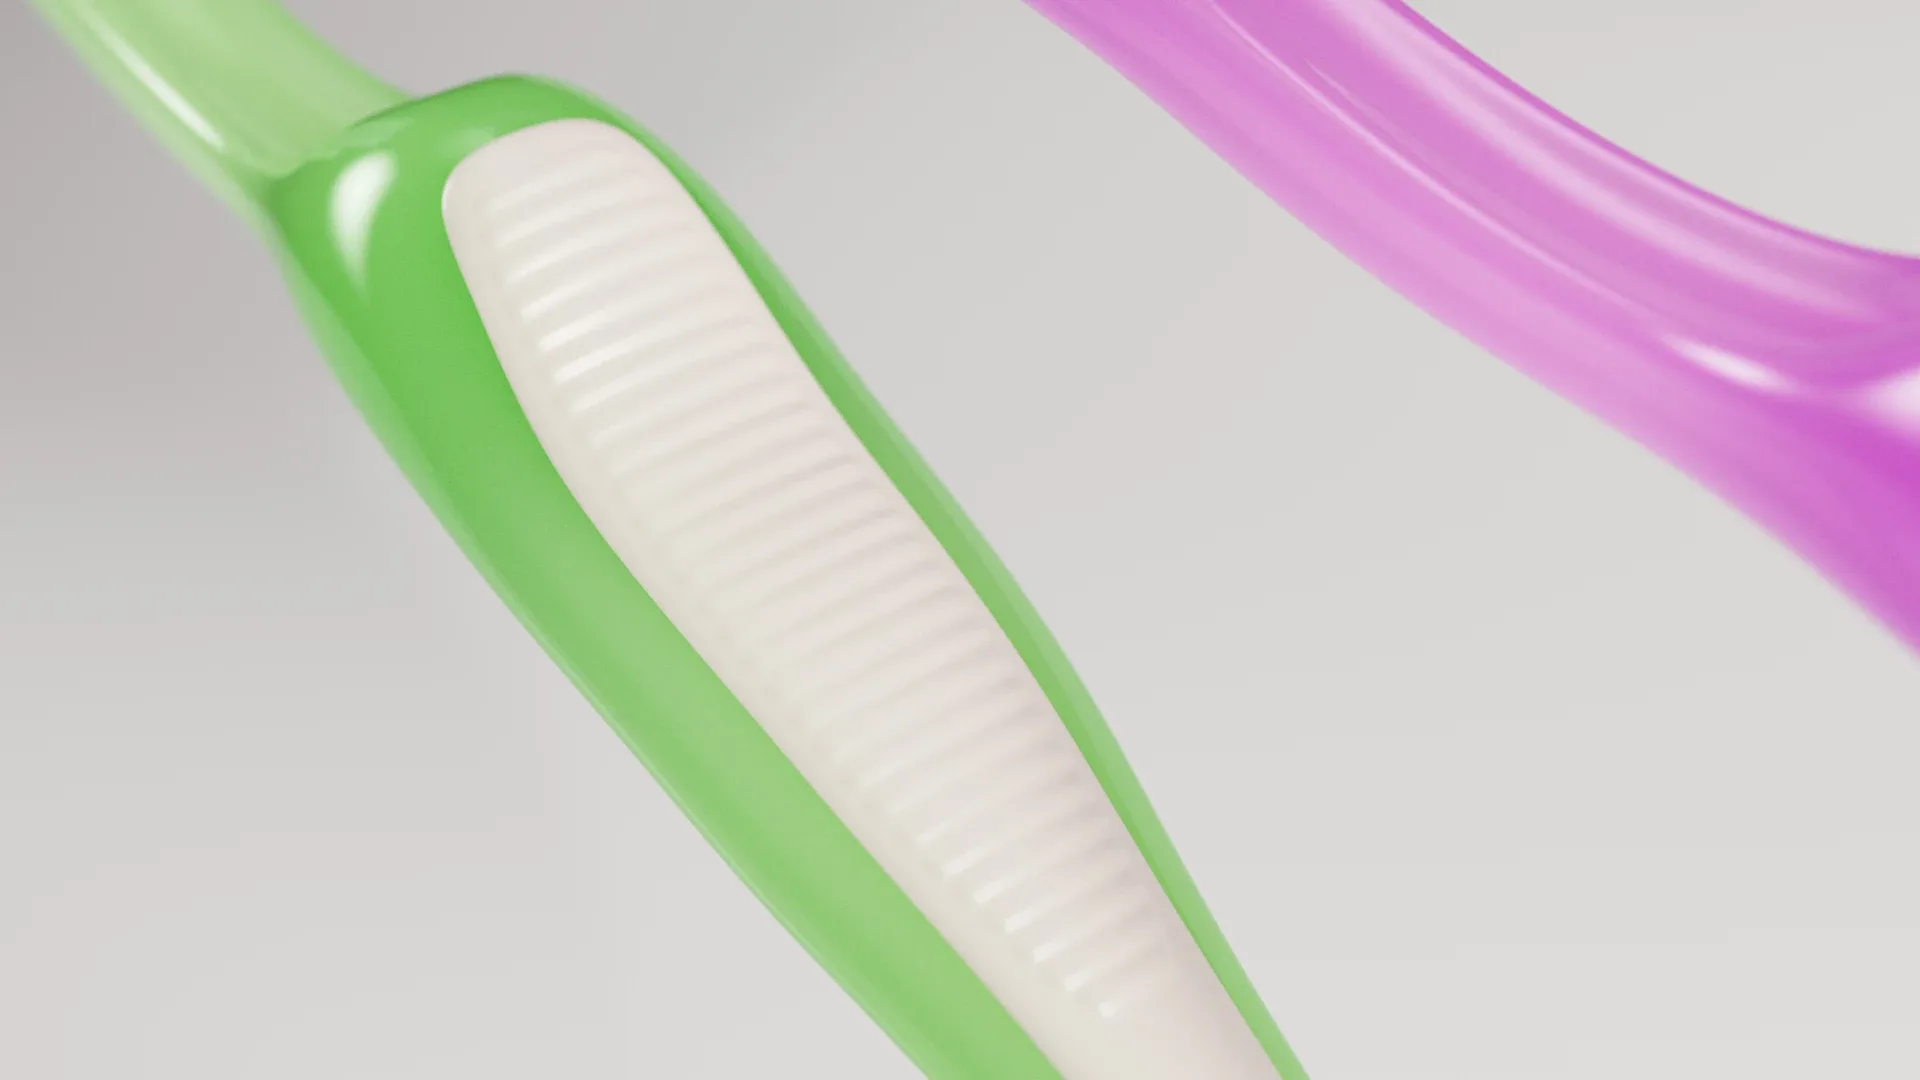 Realistic Toothbrush